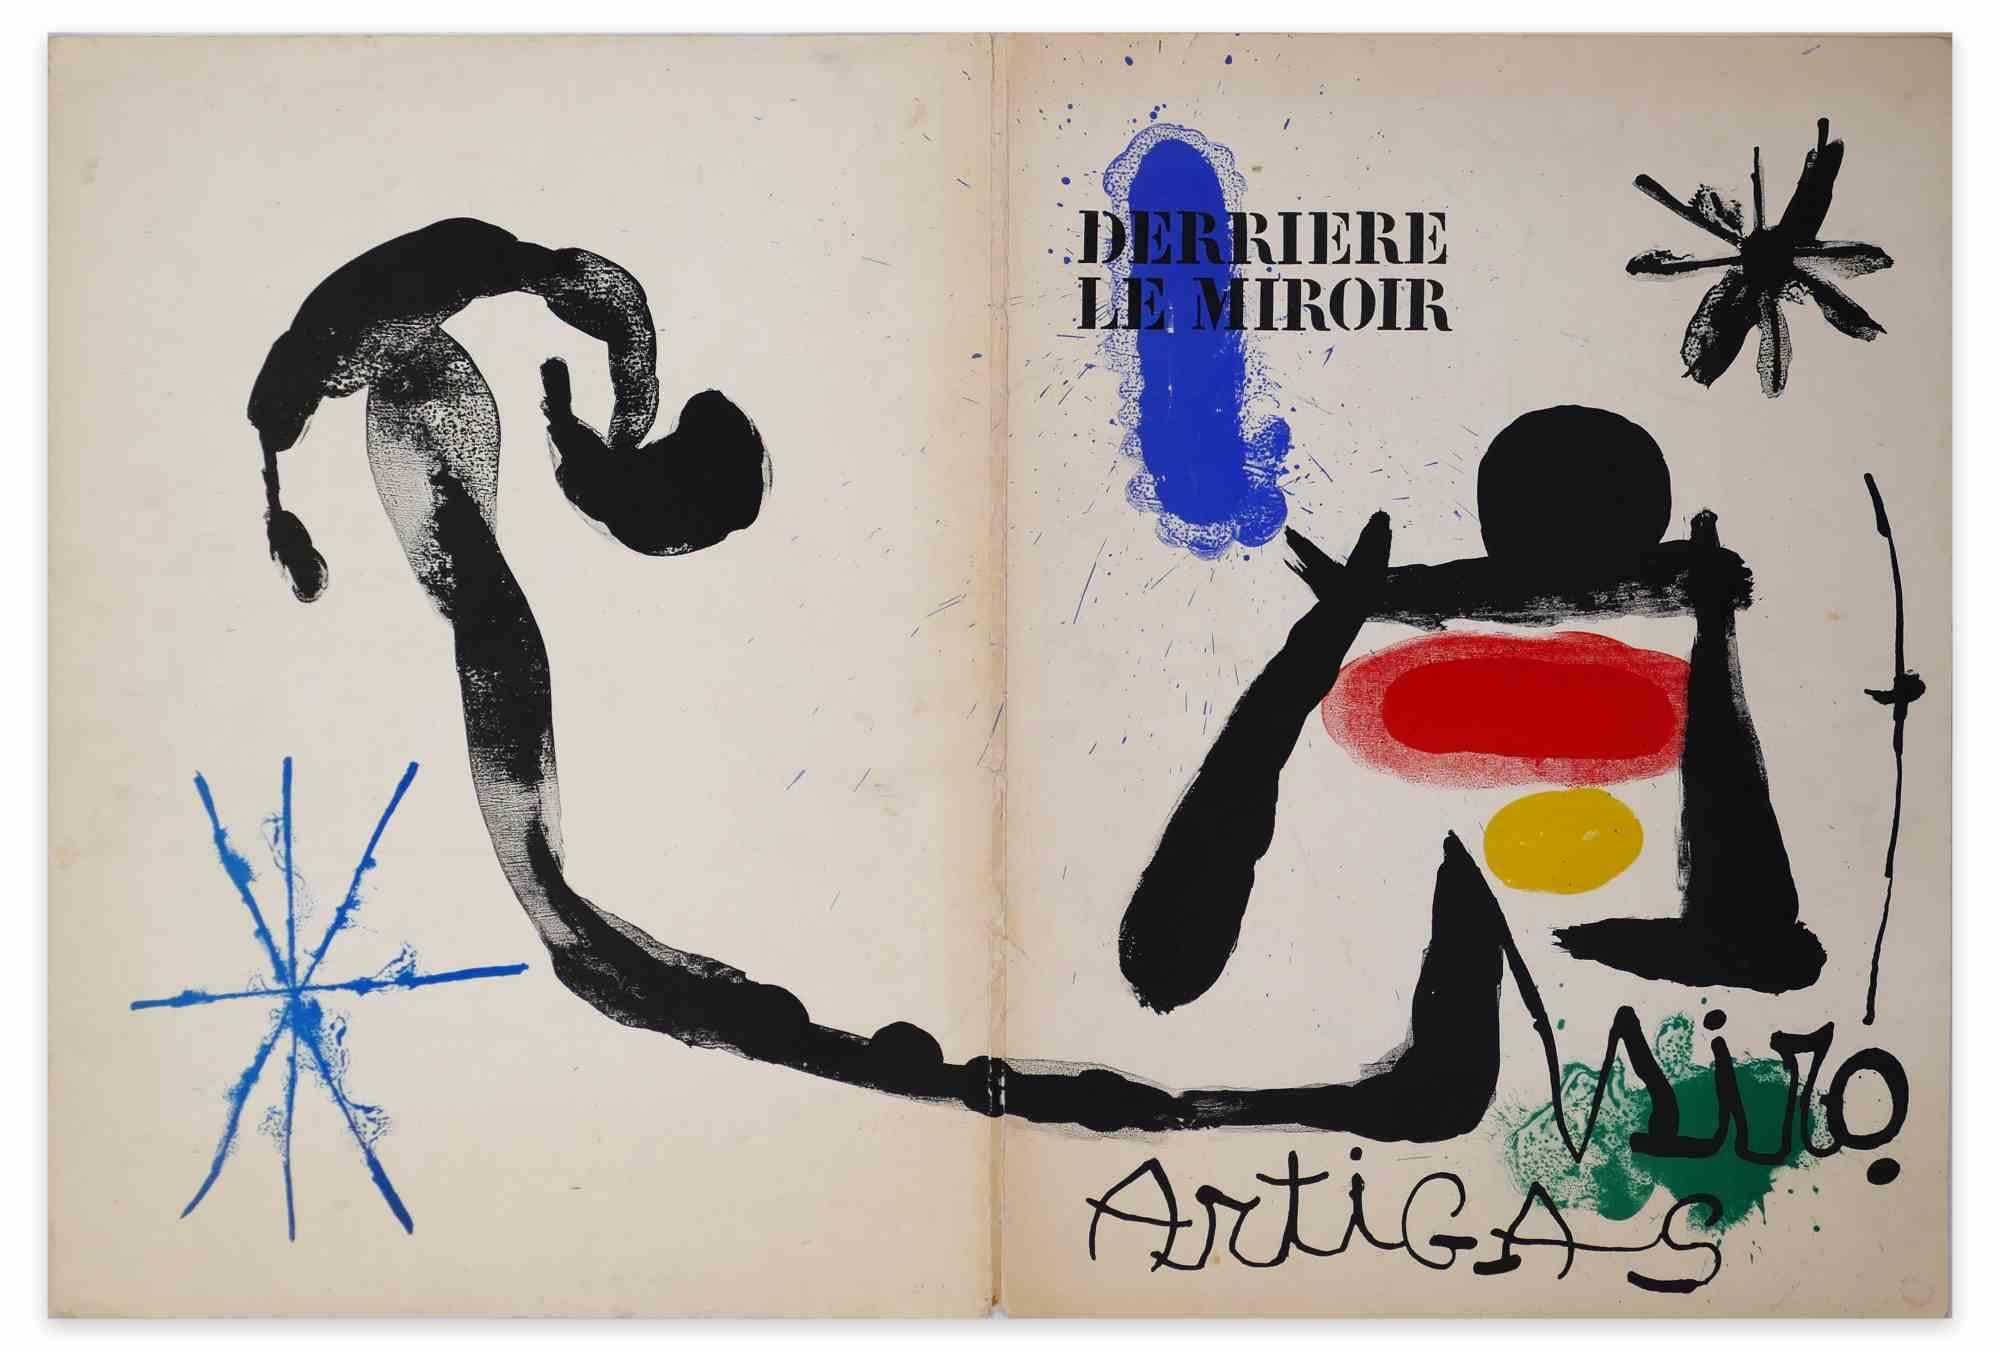 Joan Miró Abstract Print - Cover for Derrière Le Miroir - Lithograph by Joan Mirò - 1963